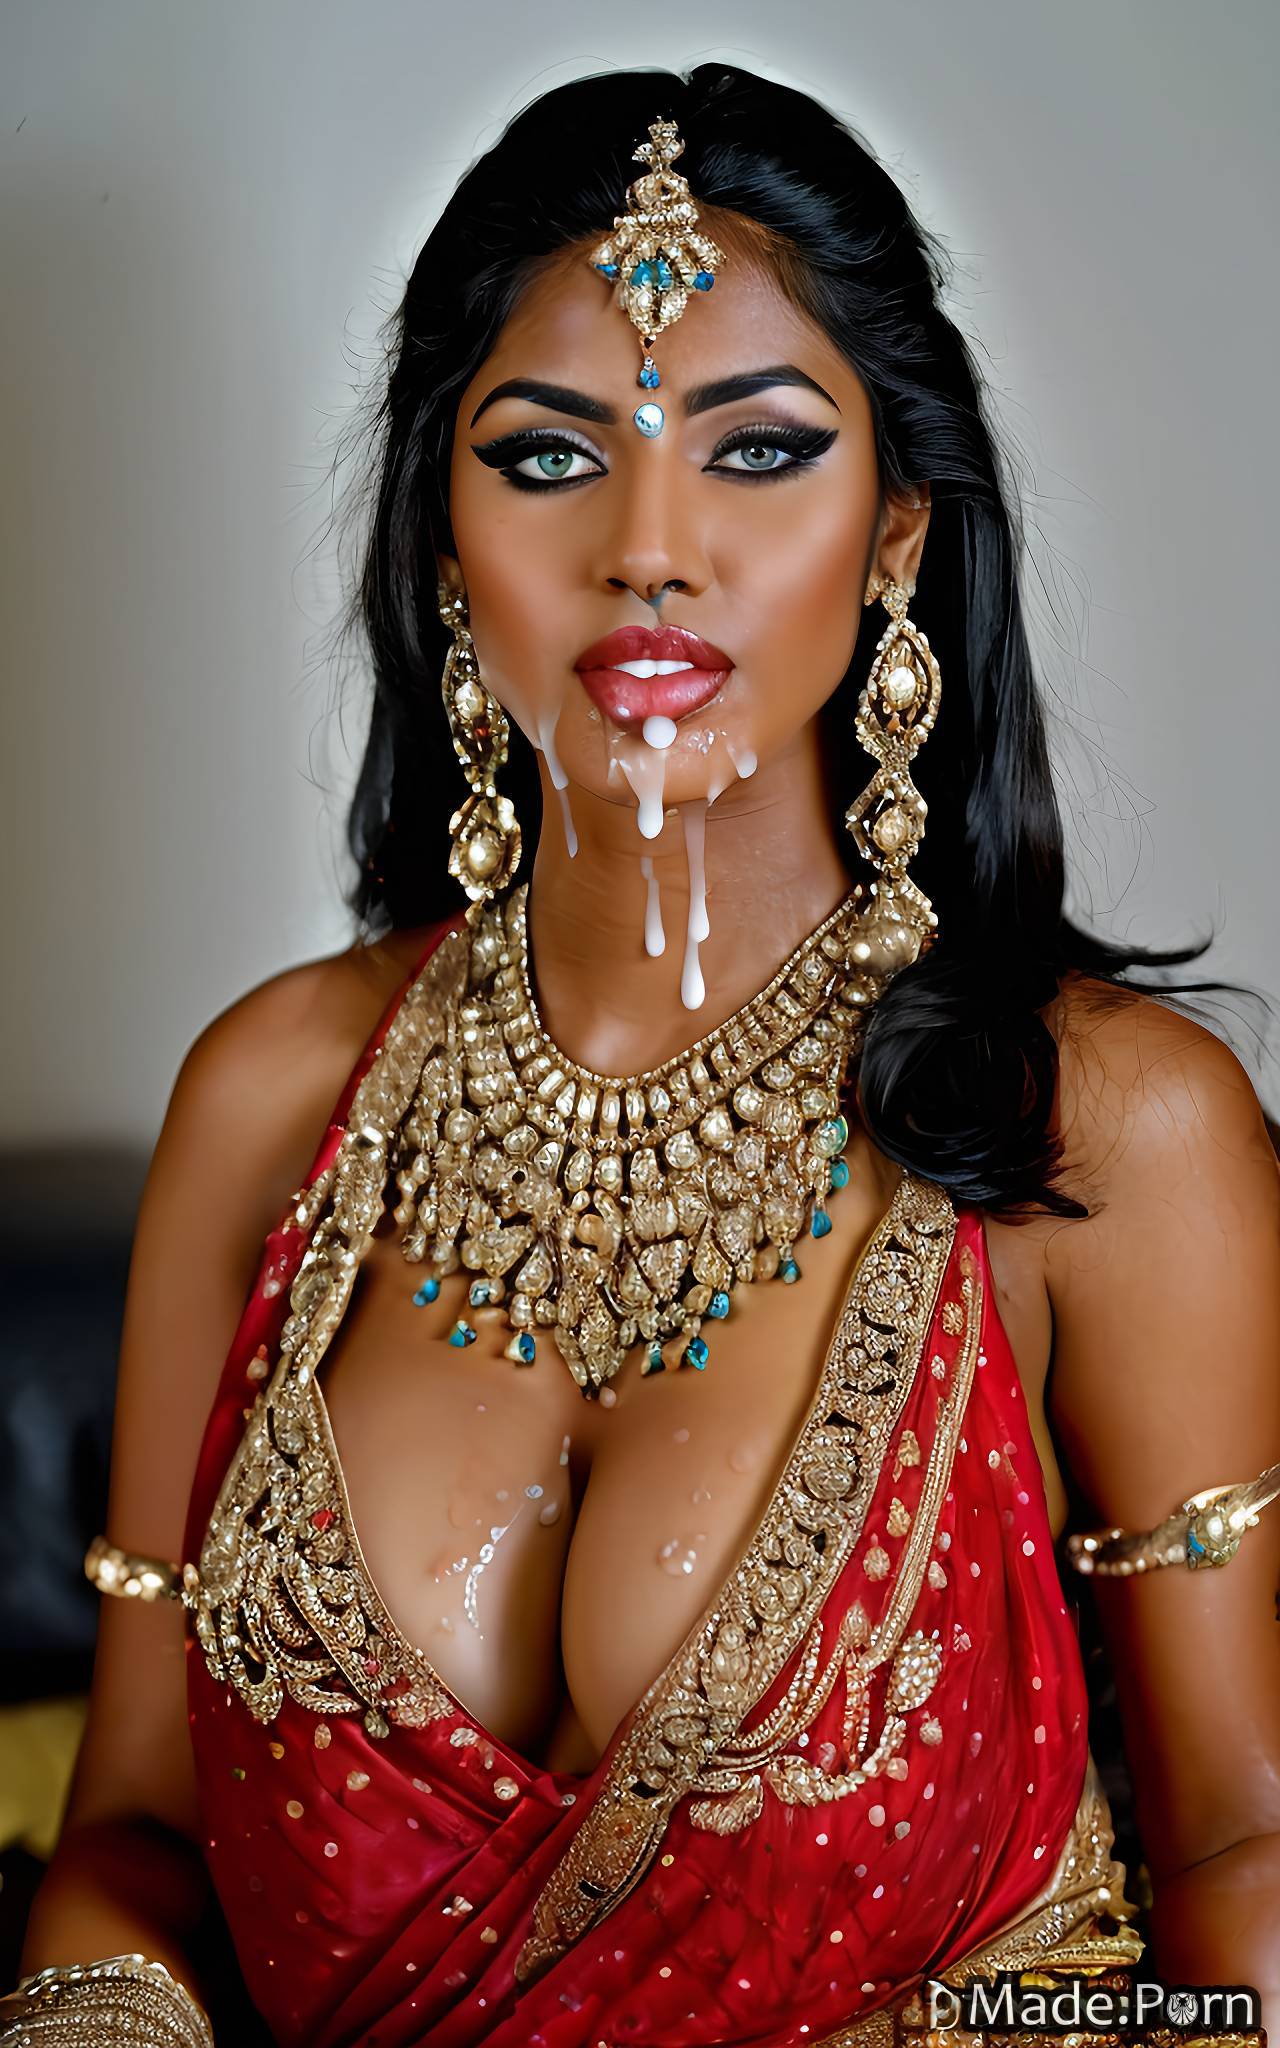 Idean Pornr Saxx - Porn image of bukkake indian made woman 20 jewelry created by AI